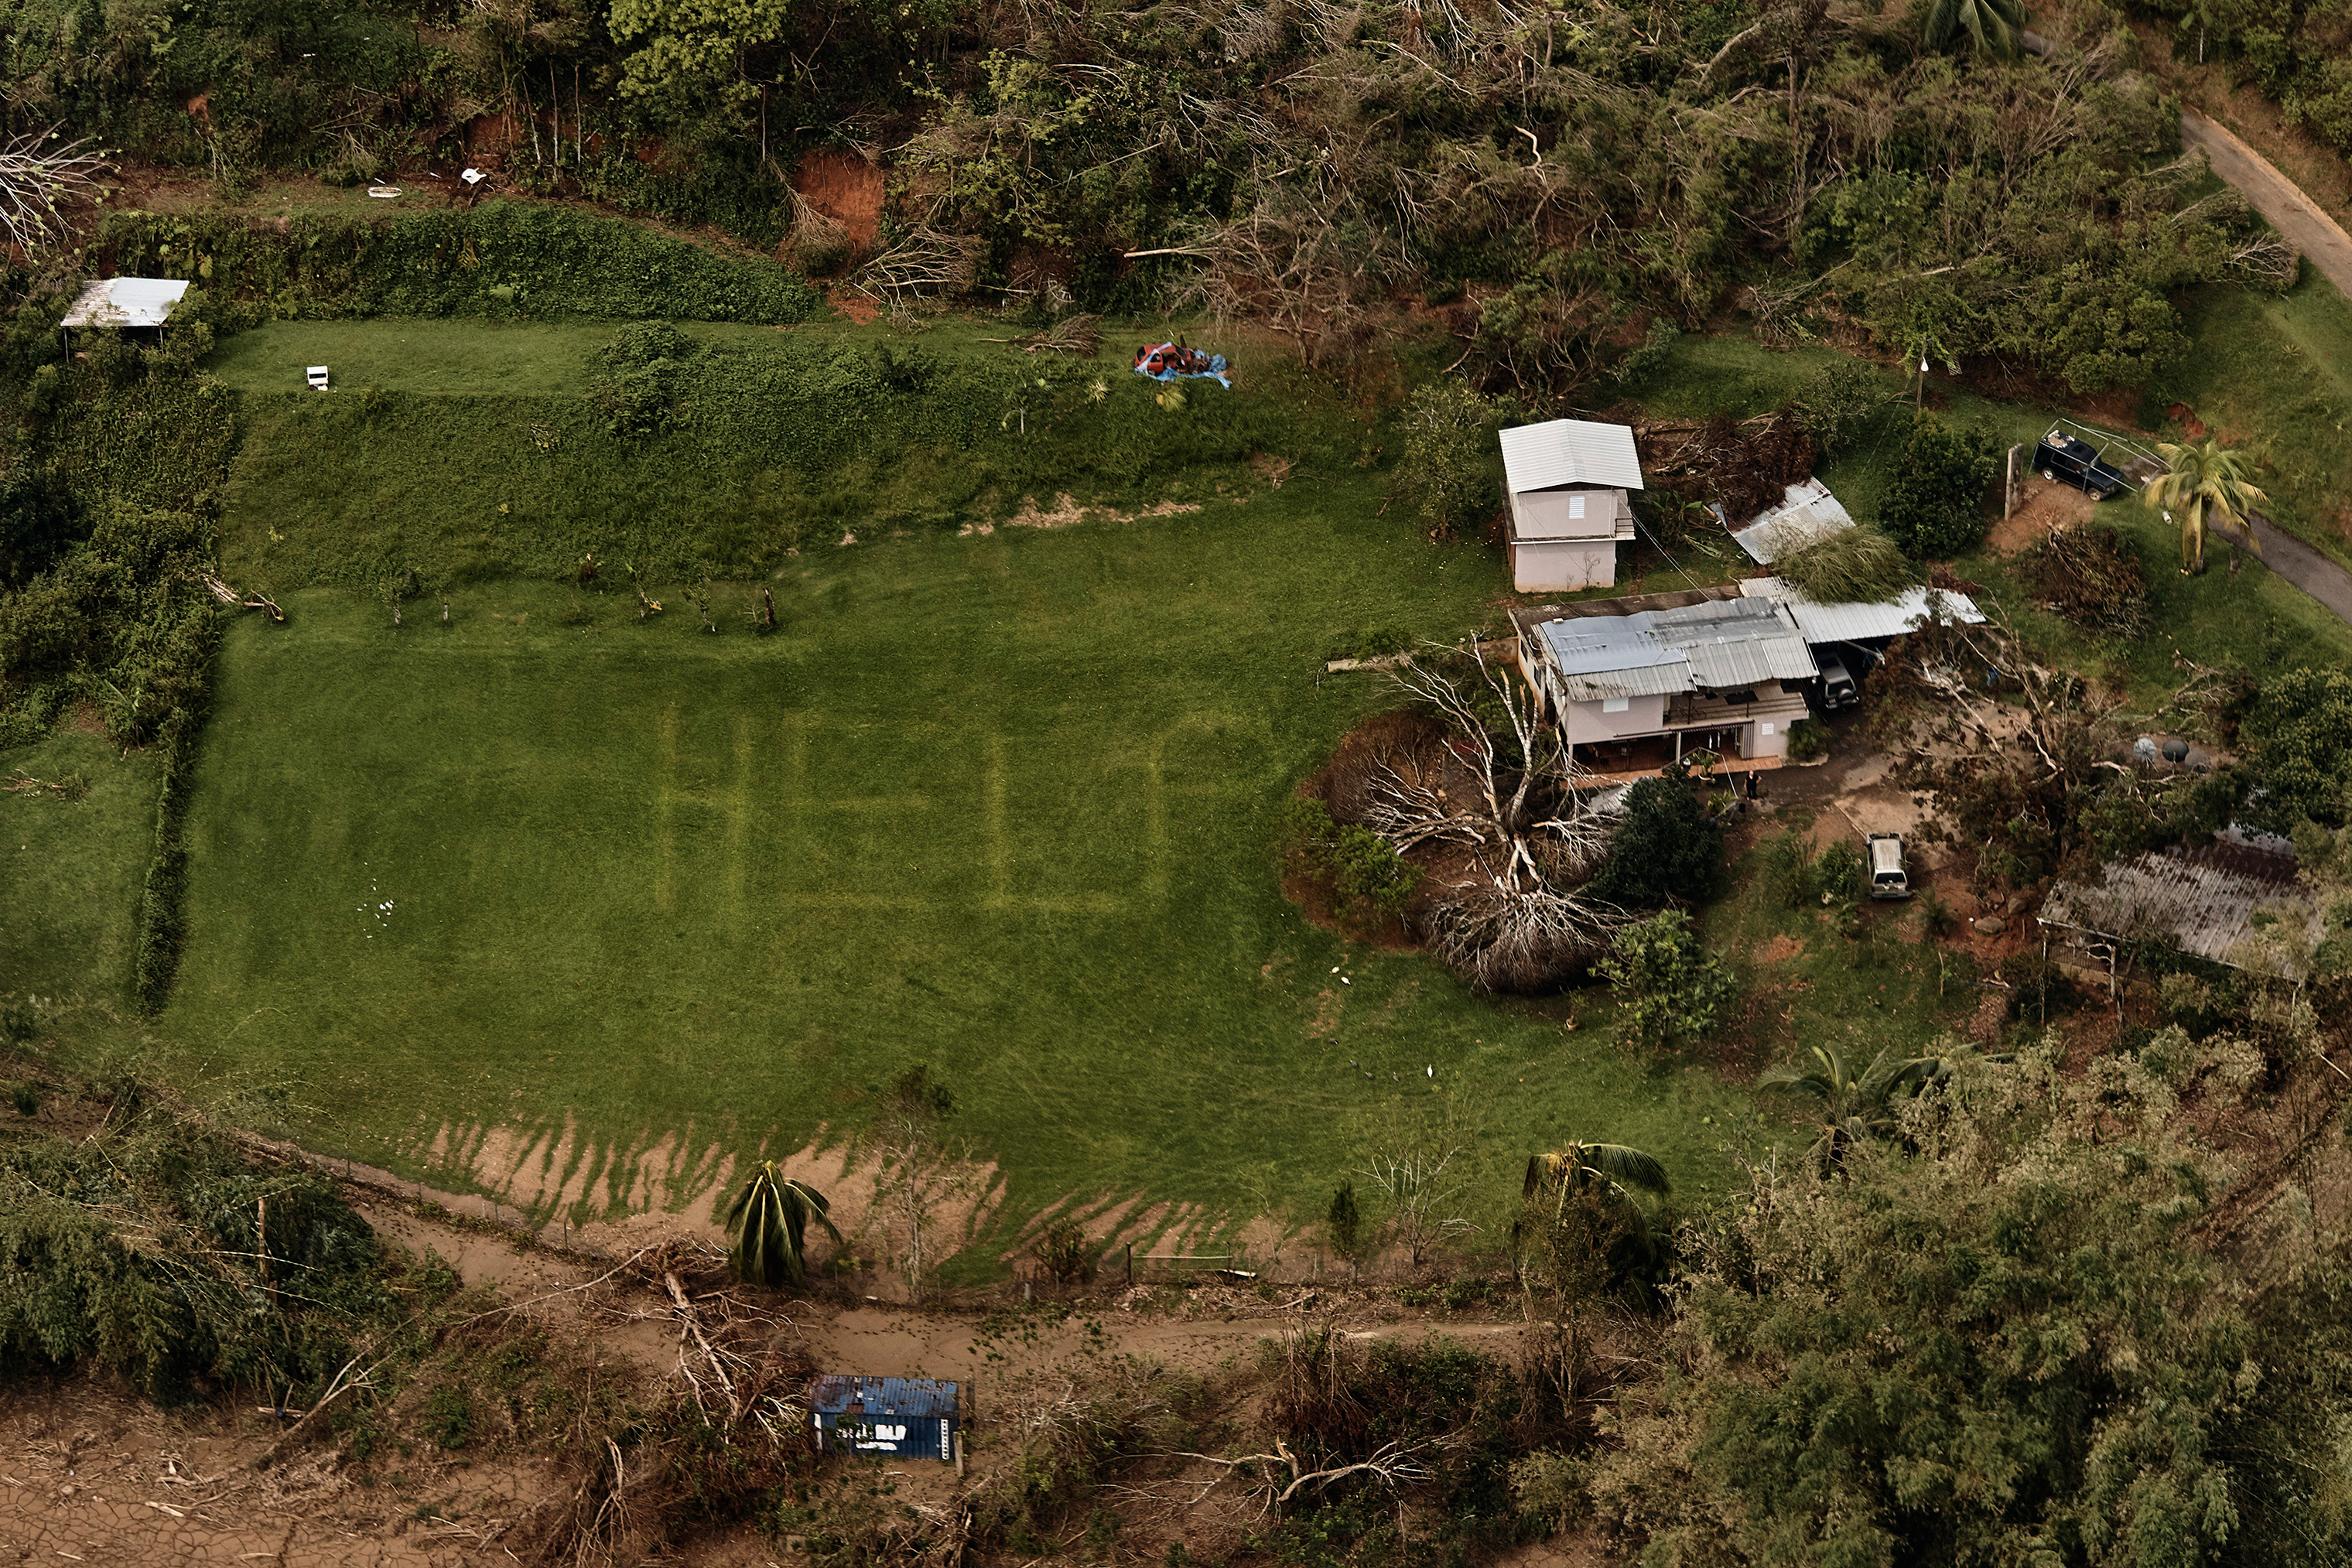 The desperate message “HELP” is seen on the lawn of a home near Utuado, Puerto Rico, in early October. (Andres Kudacki for TIME)